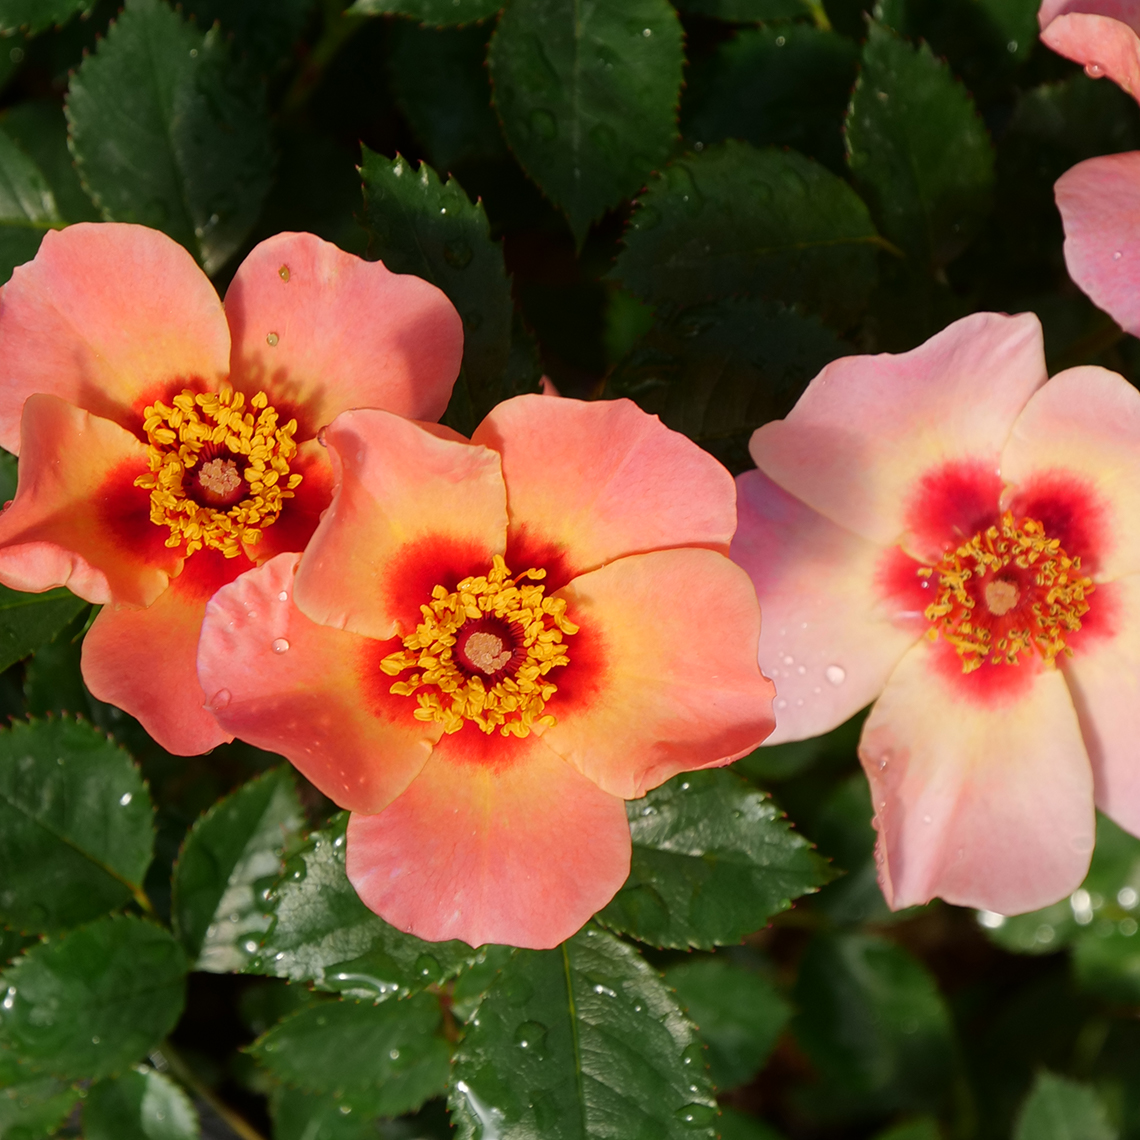 Three pink-orange flowers of Ringo All Star rose face the camera